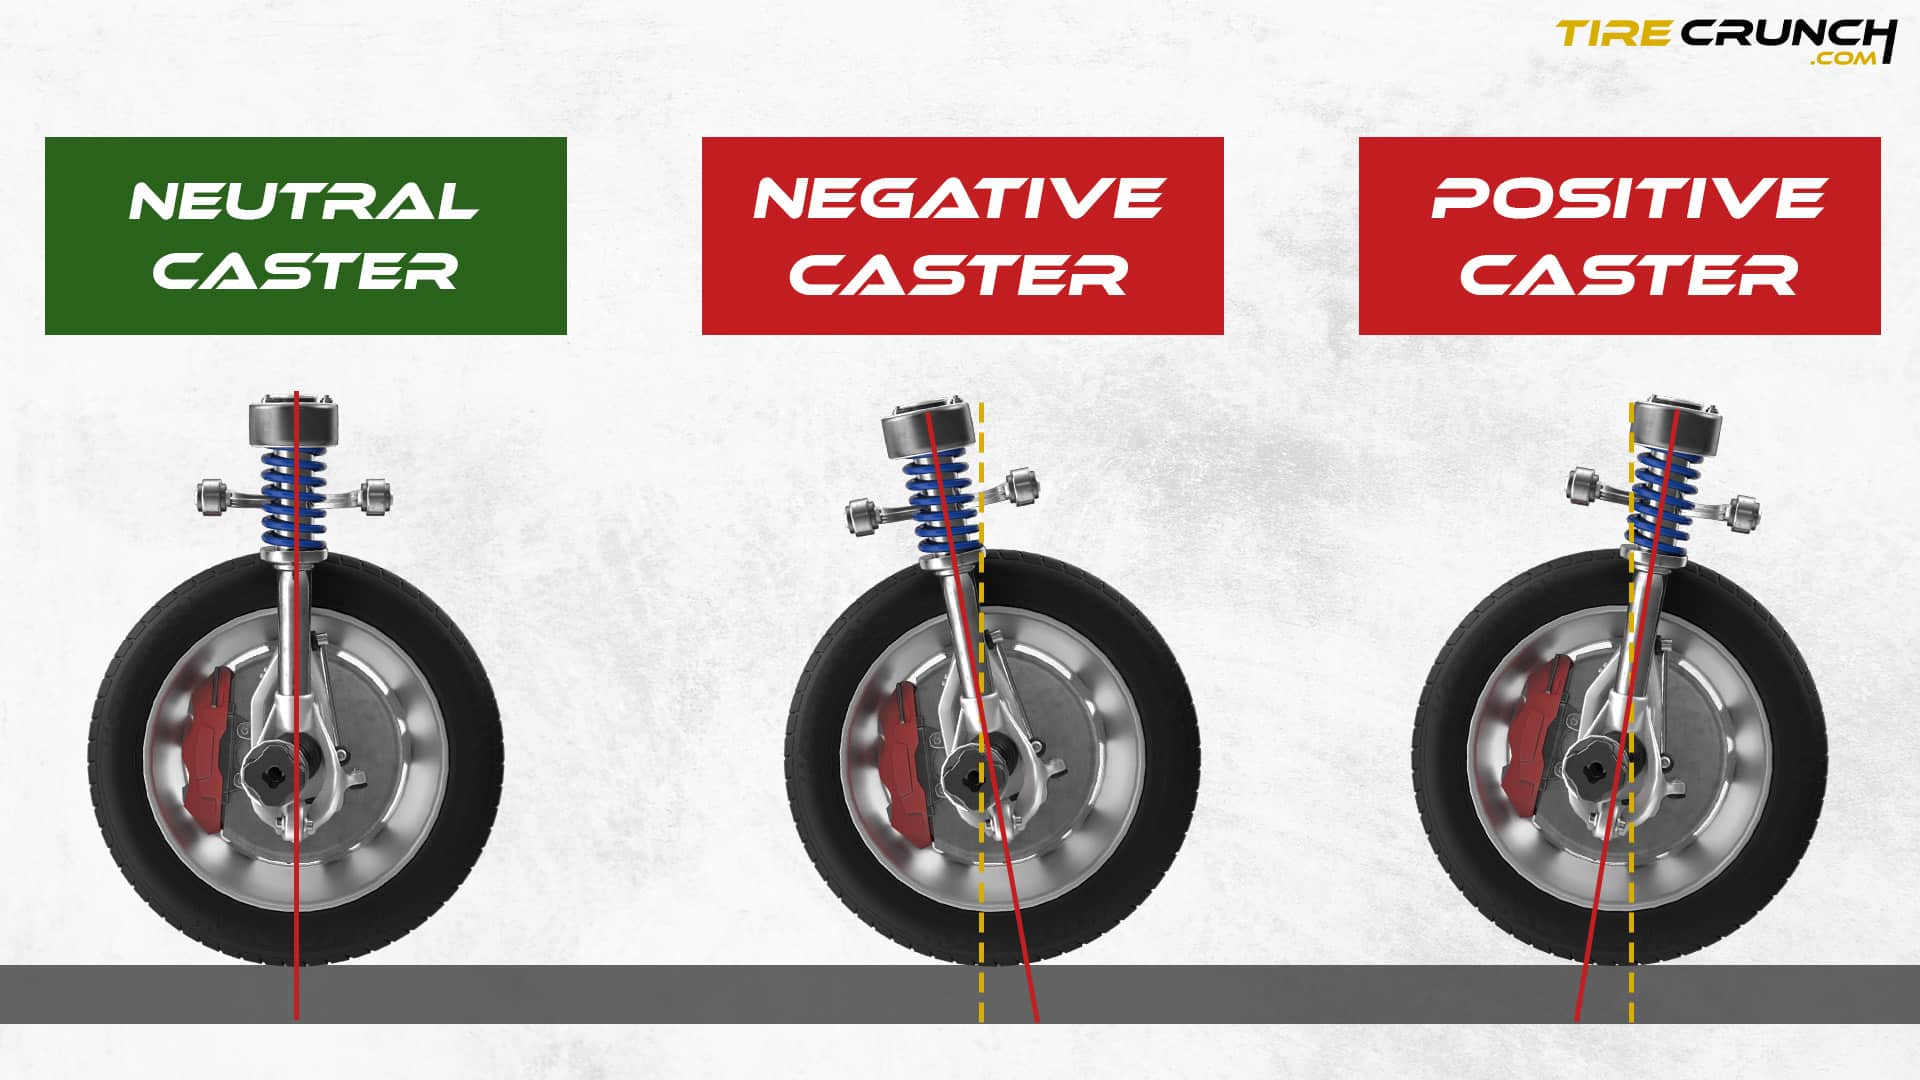 Wheel Alignment: Examples of correct and Incorrect Caster